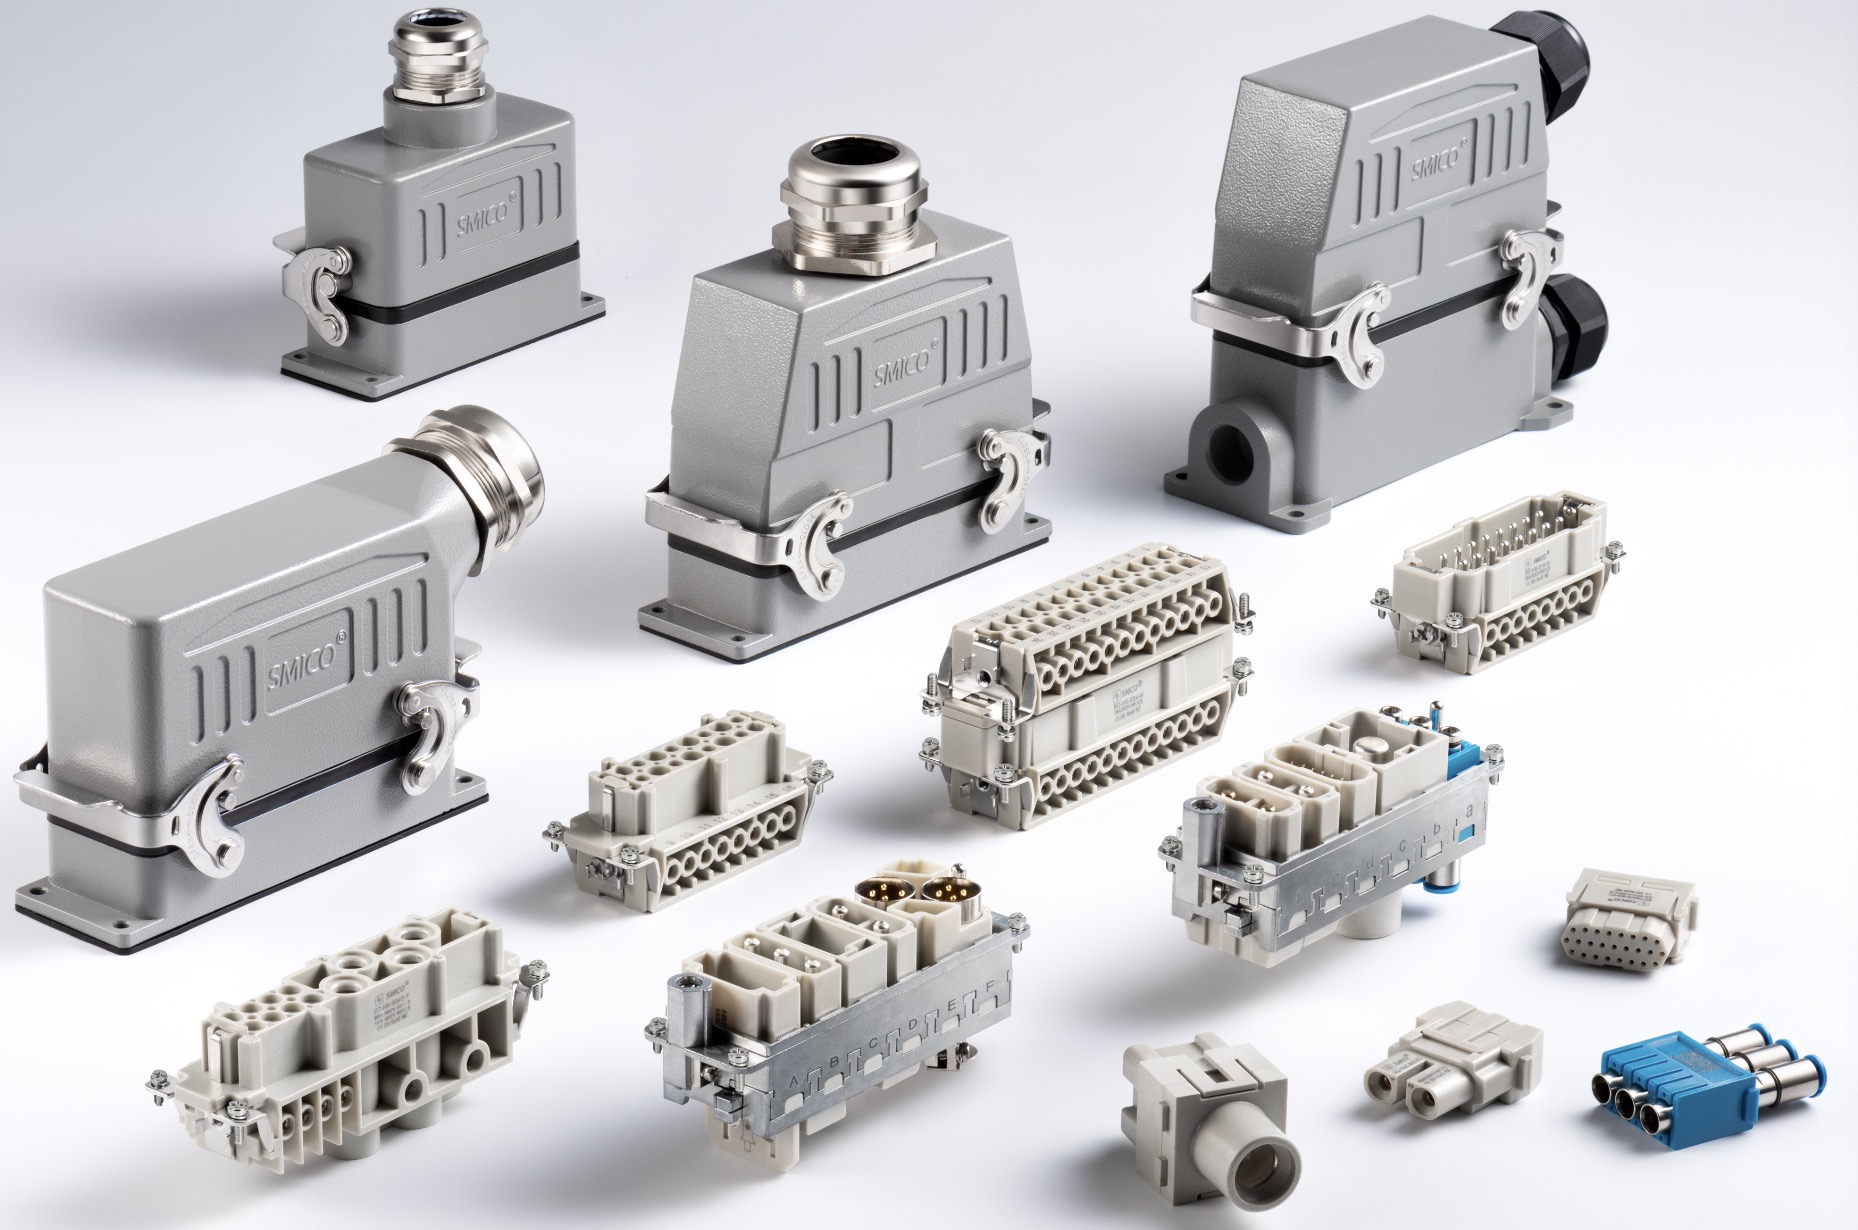 Breaking through the traditional wiring method | Product features and applications of SMICO heavy-duty connectors